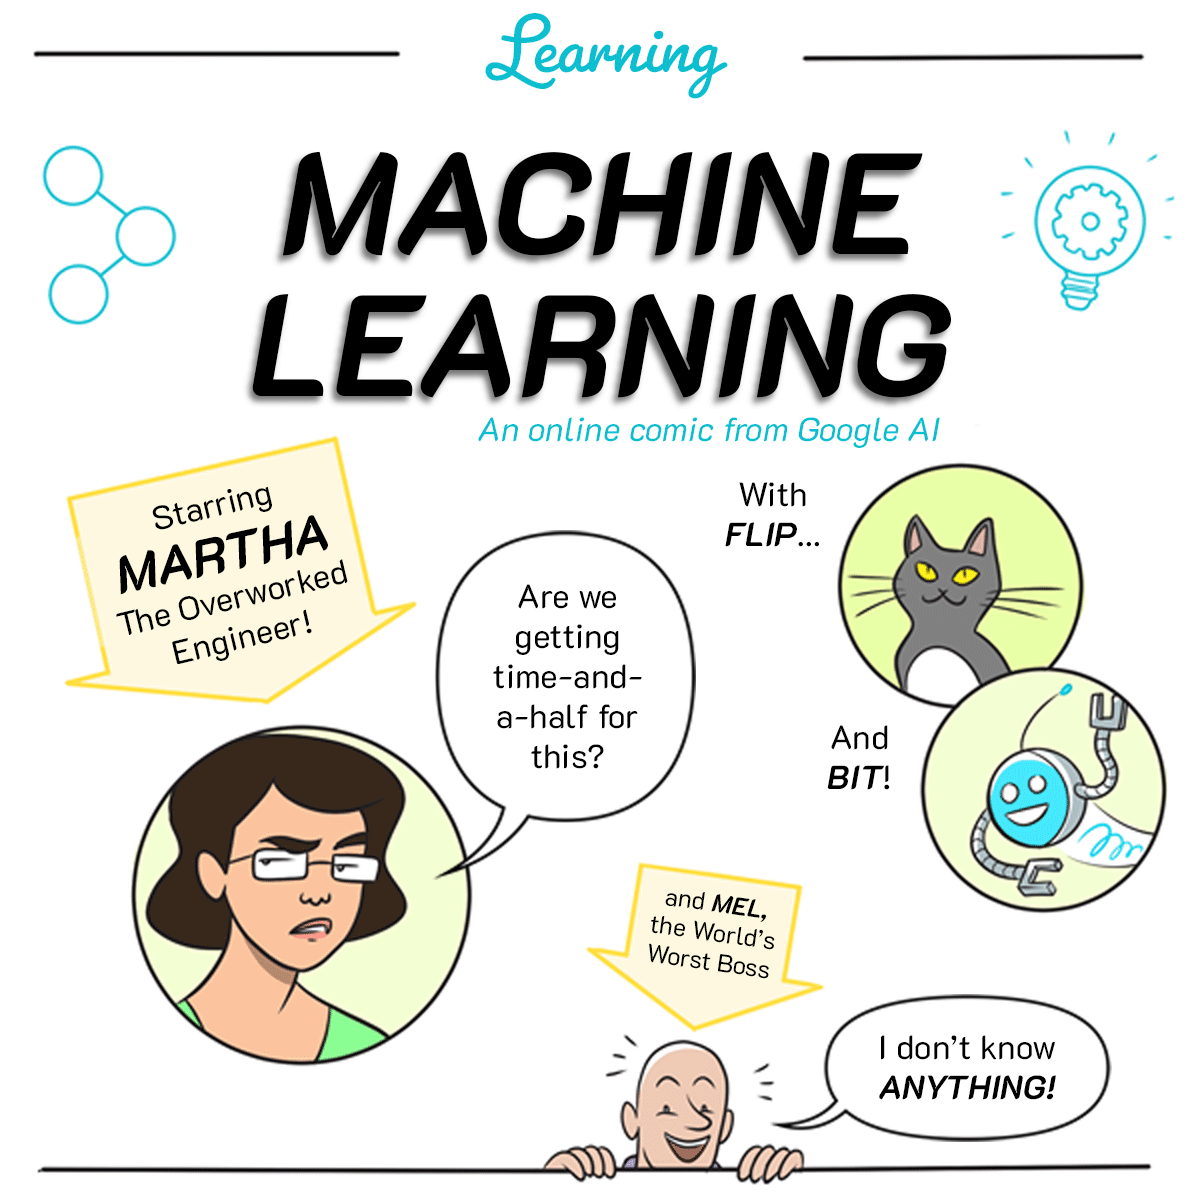 google machine learning products